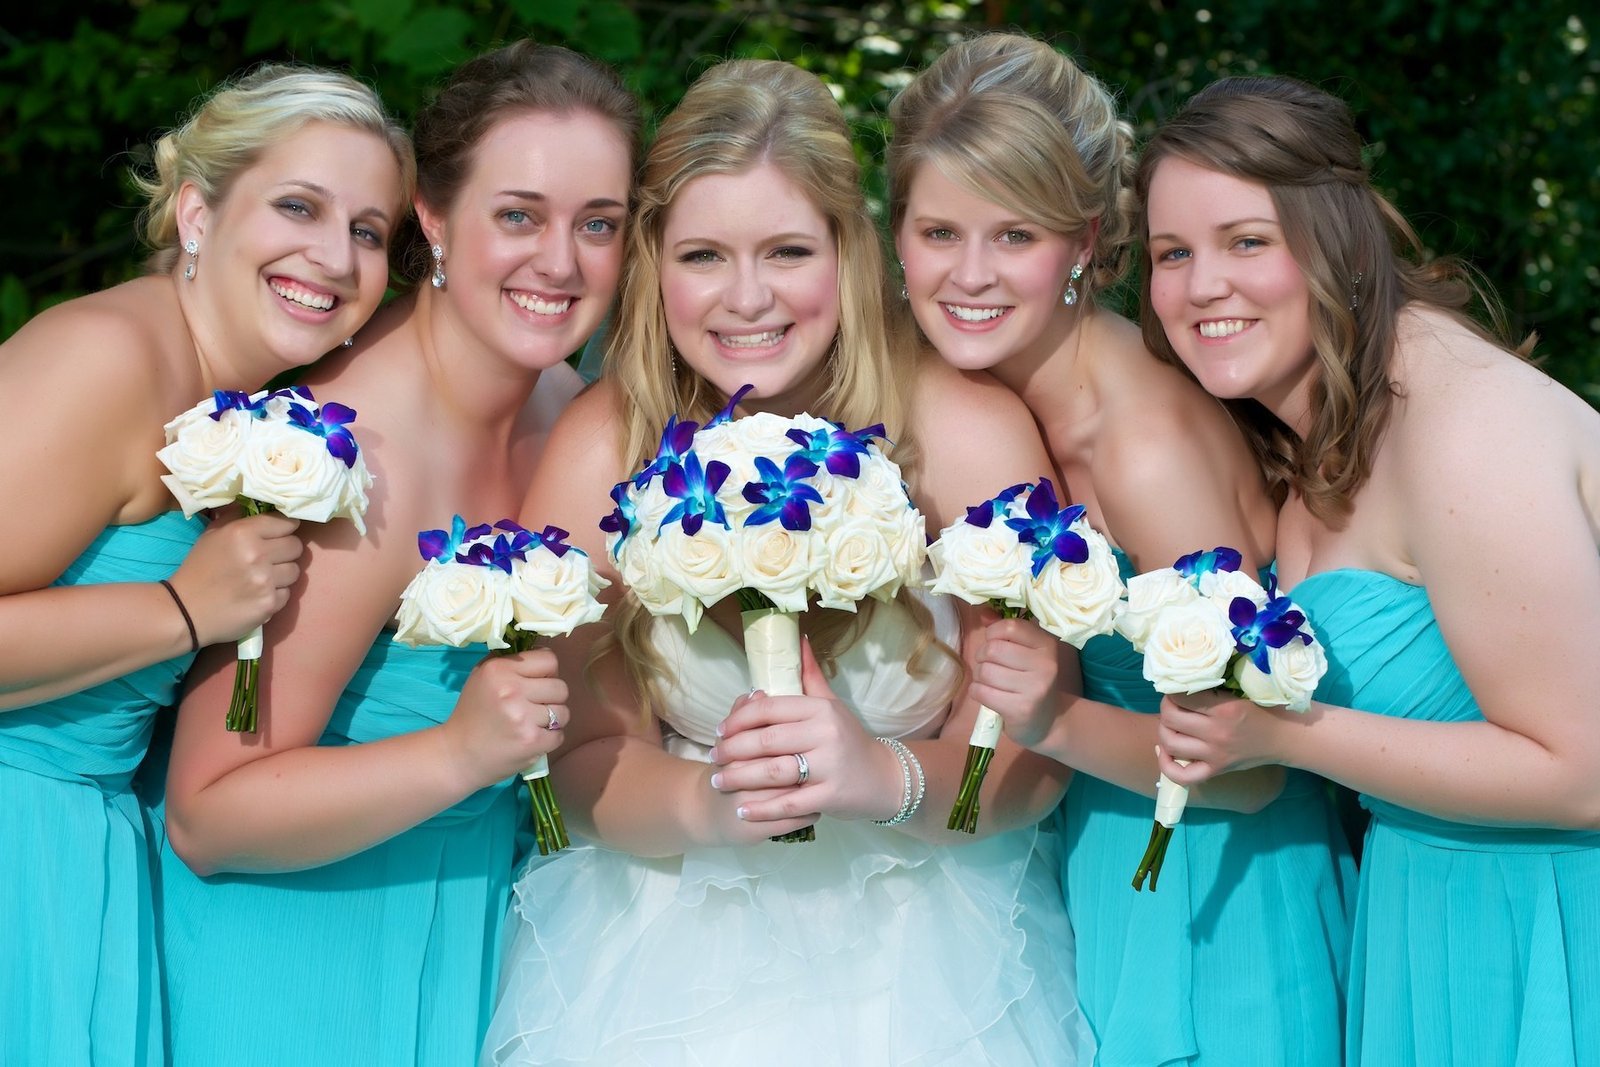 Bridal and Bridesmaid bouquets with blue orchids